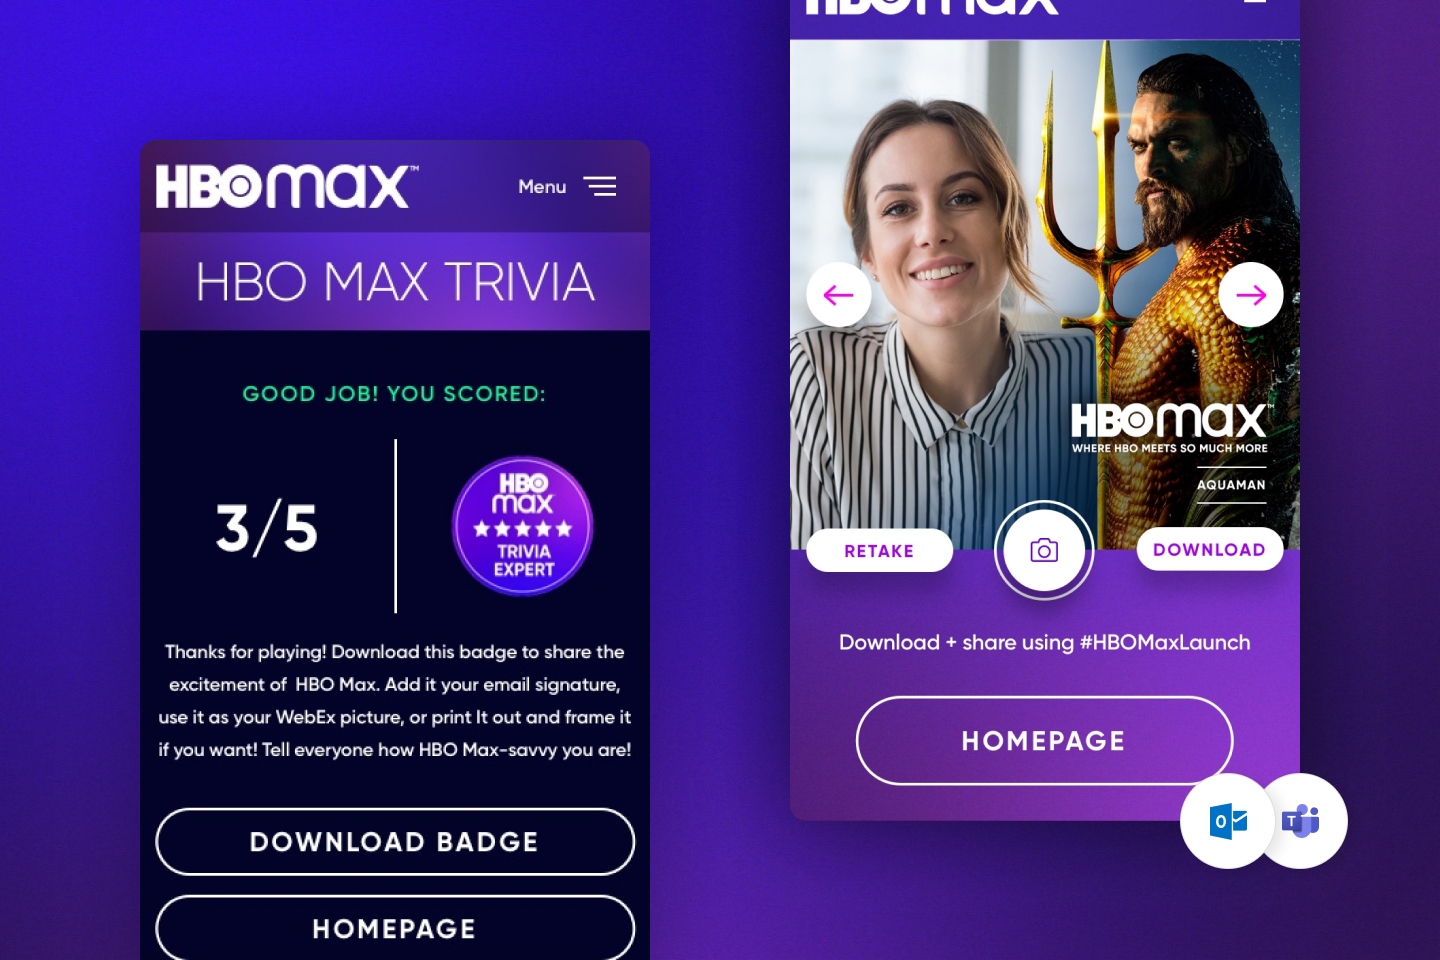 A screenshot of mobile screens for HBO Max Trivia